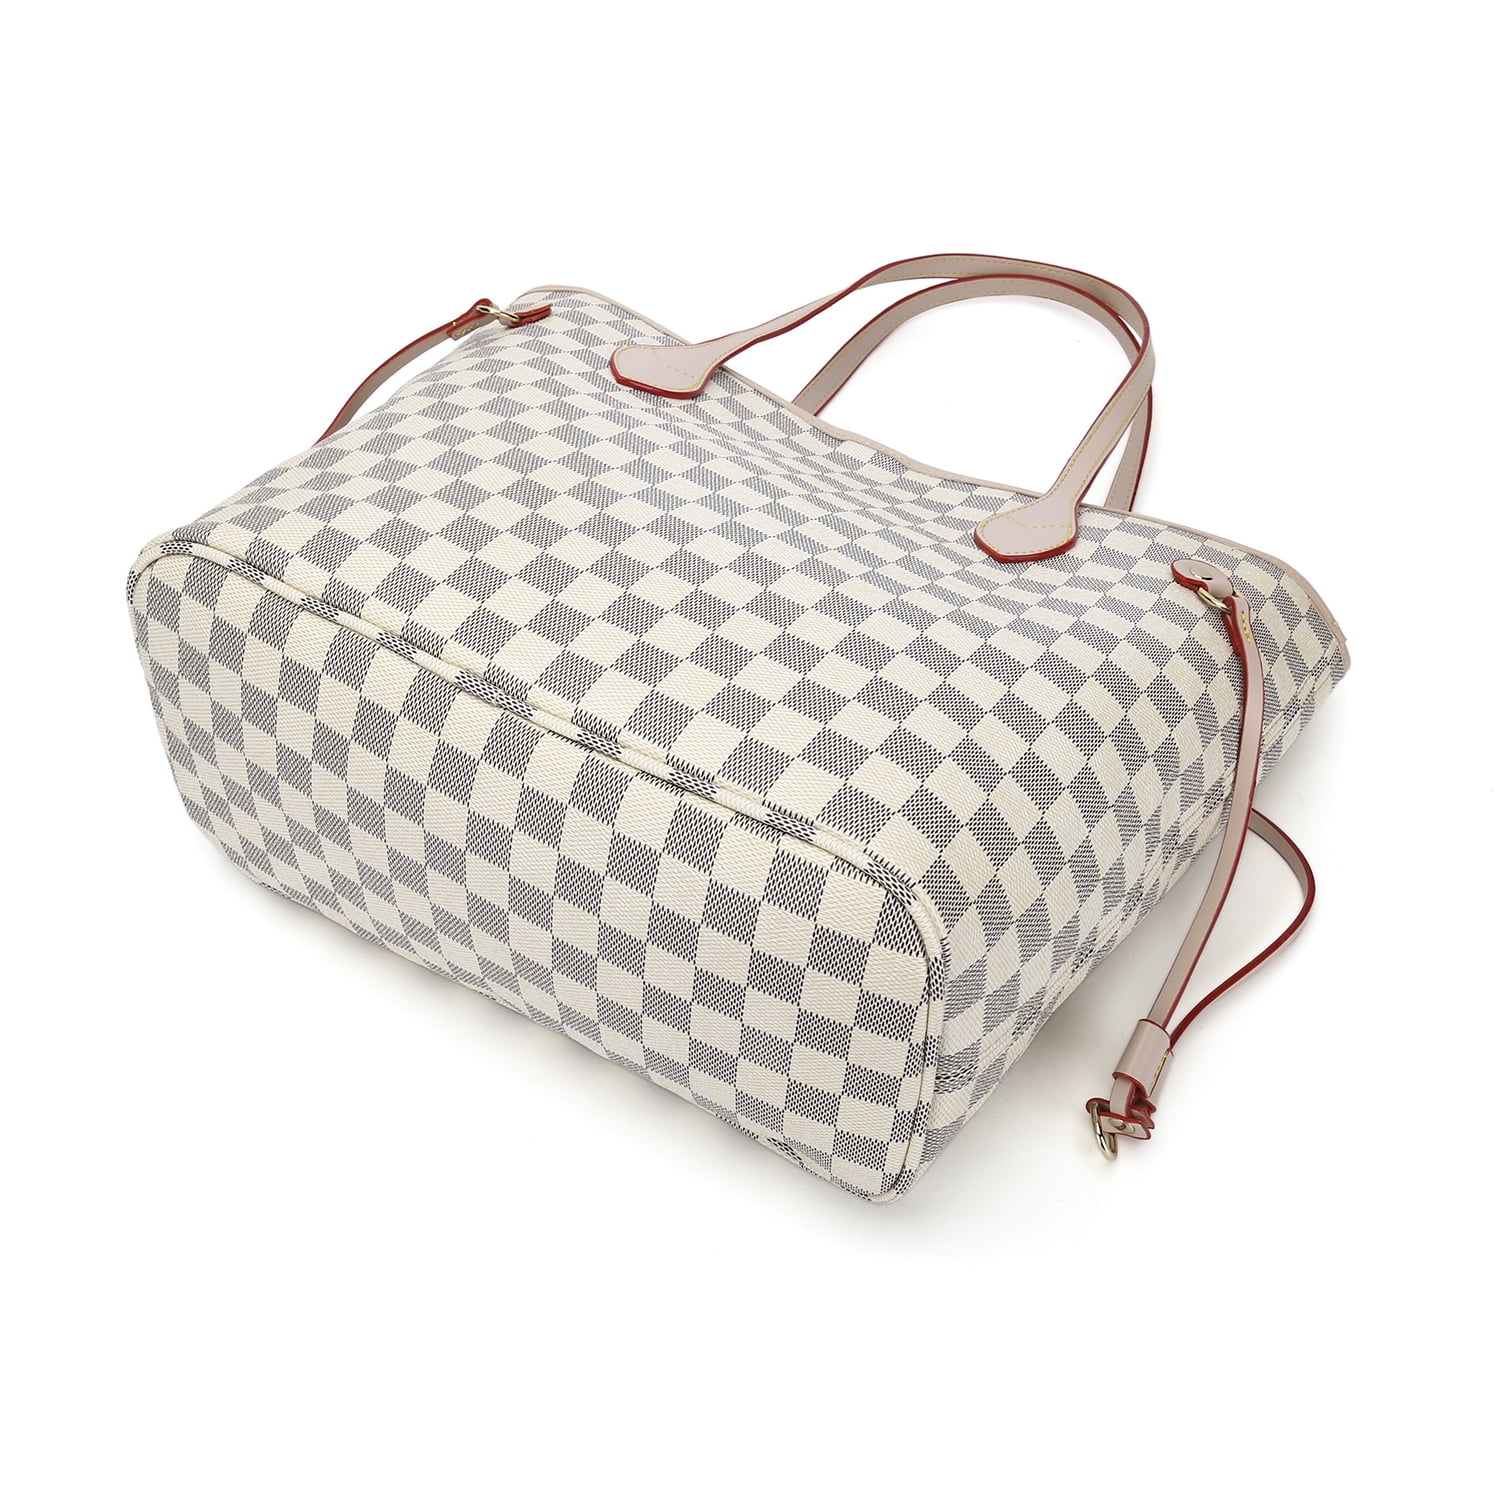 RICHPORTS 7 in 1 Womens Bags Checkered Tote Shoulder India